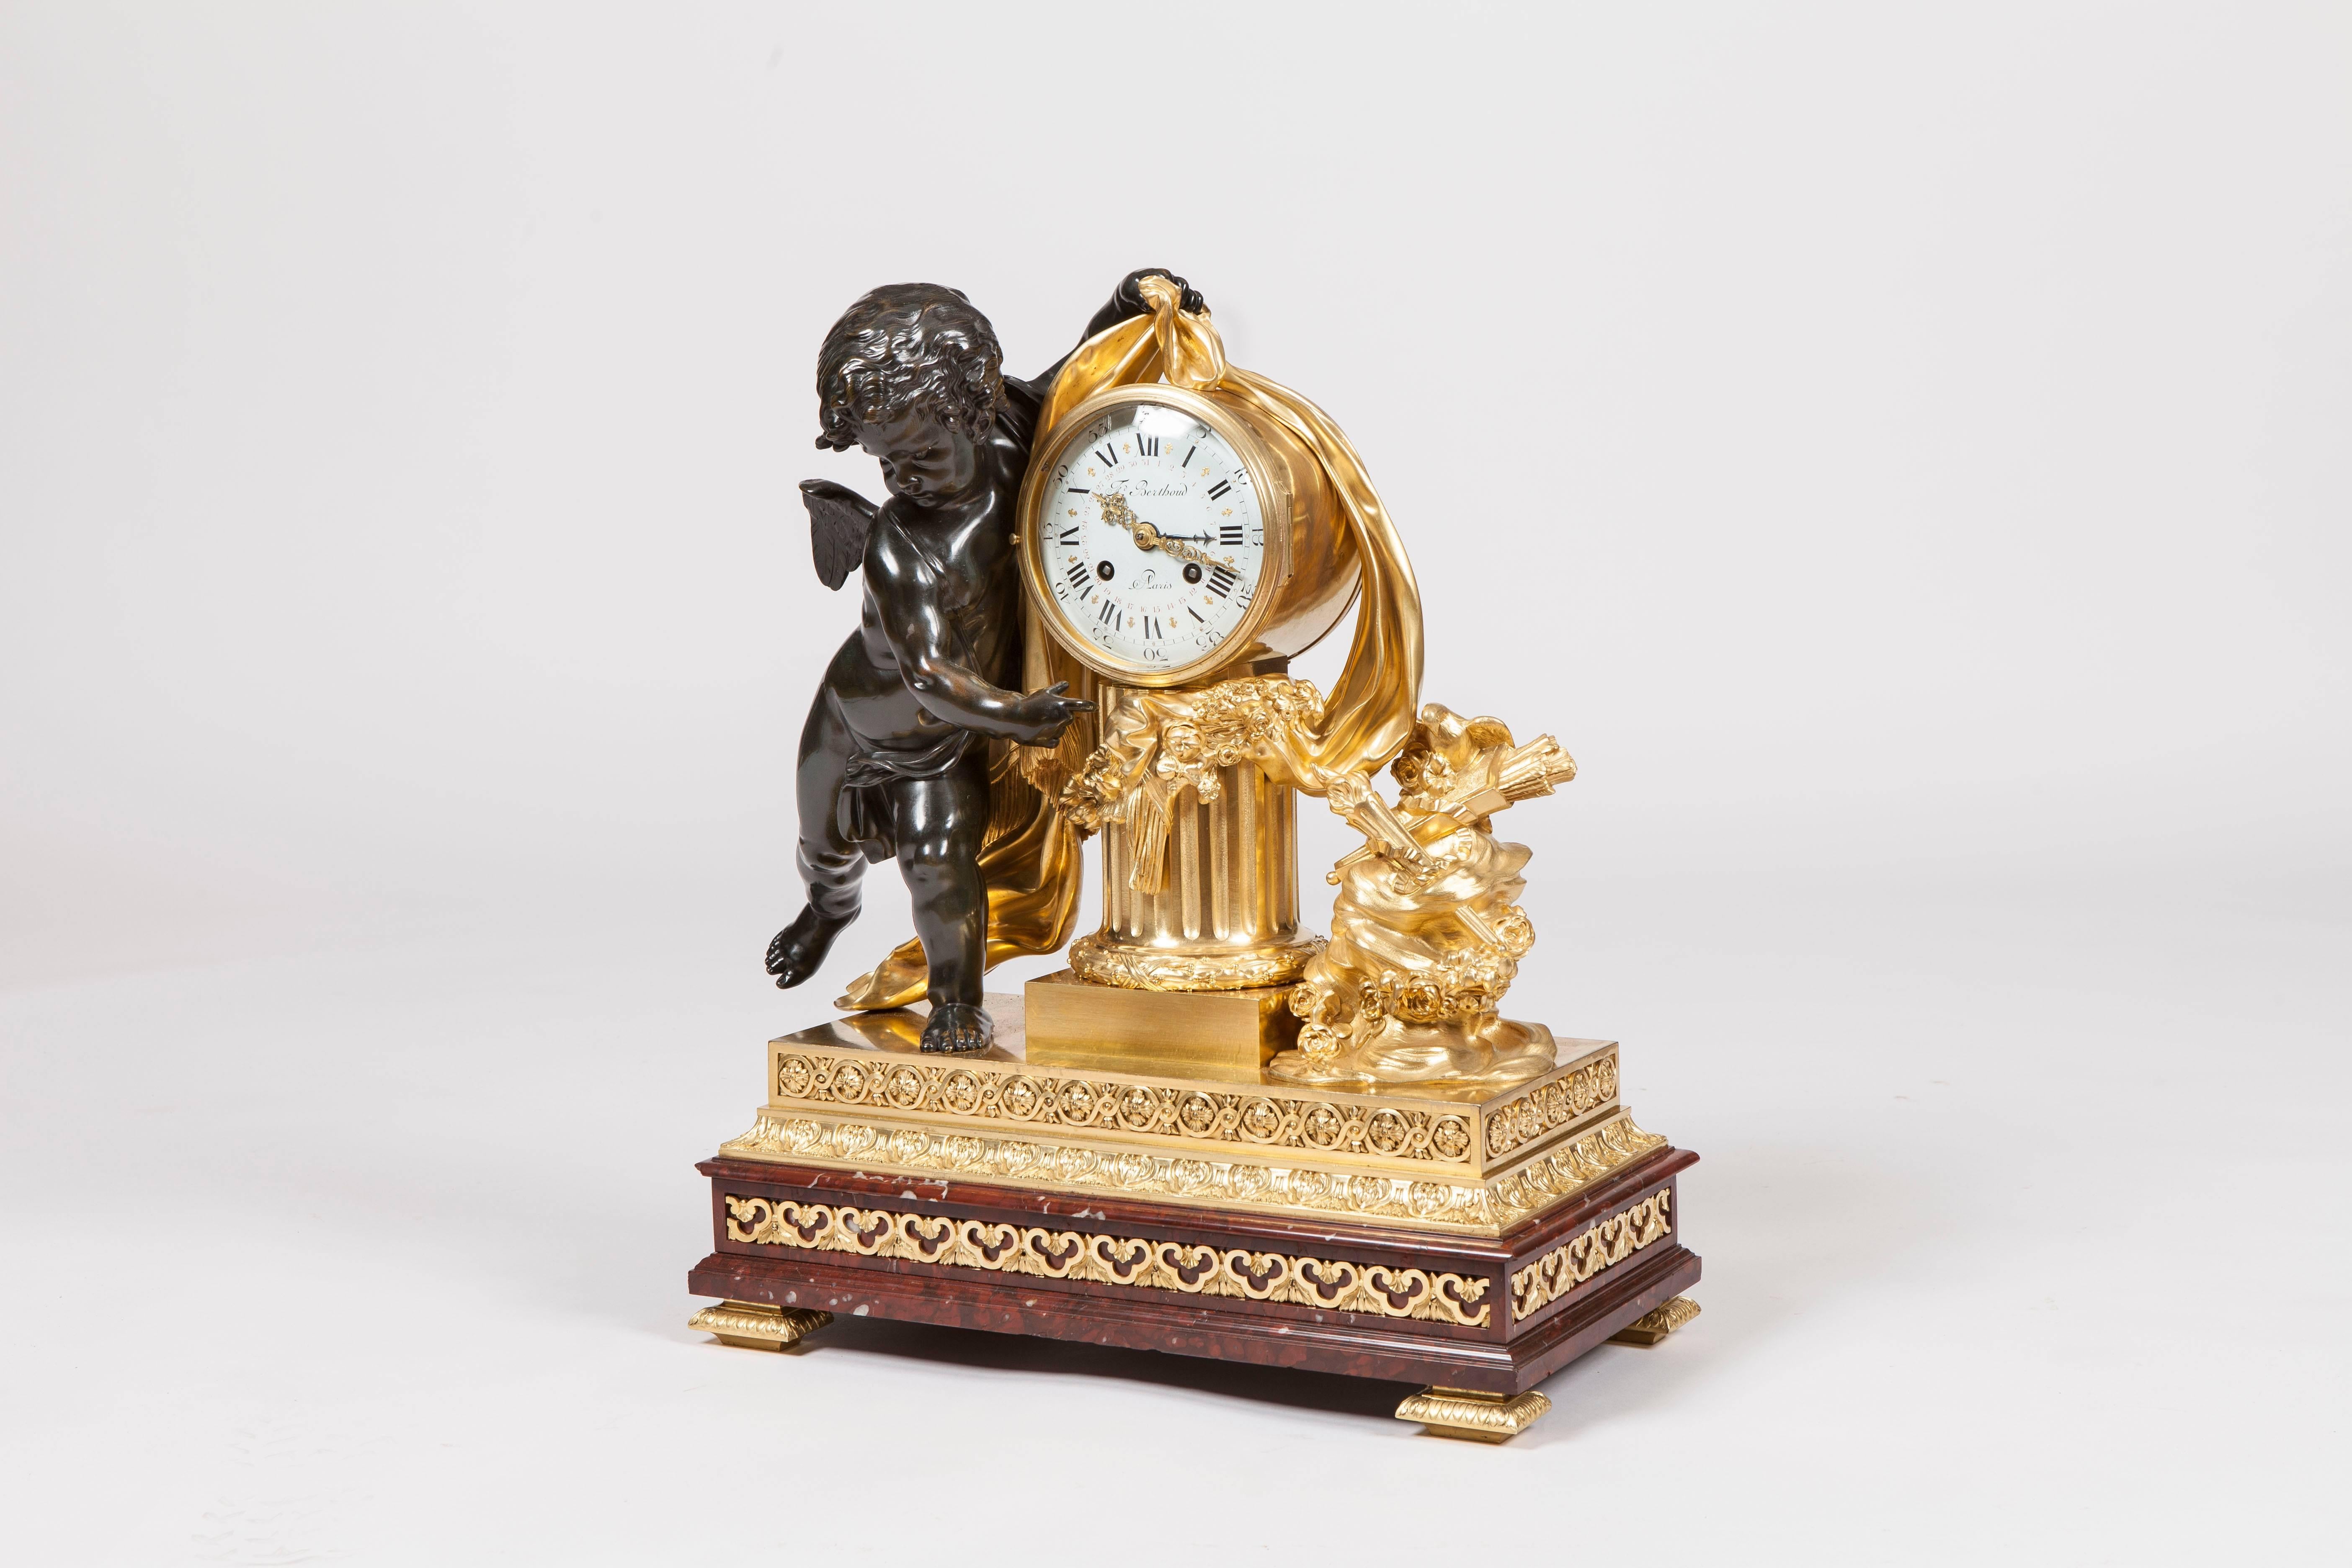 A fine garniture de cheminée firmly attributed to Henry Dasson

Constructed in both dark patinated bronze and gilt bronze, with Rouge Griotte marble; the clock case having a stepped platform base decorated with trefoil hearts and entrelacs, upon